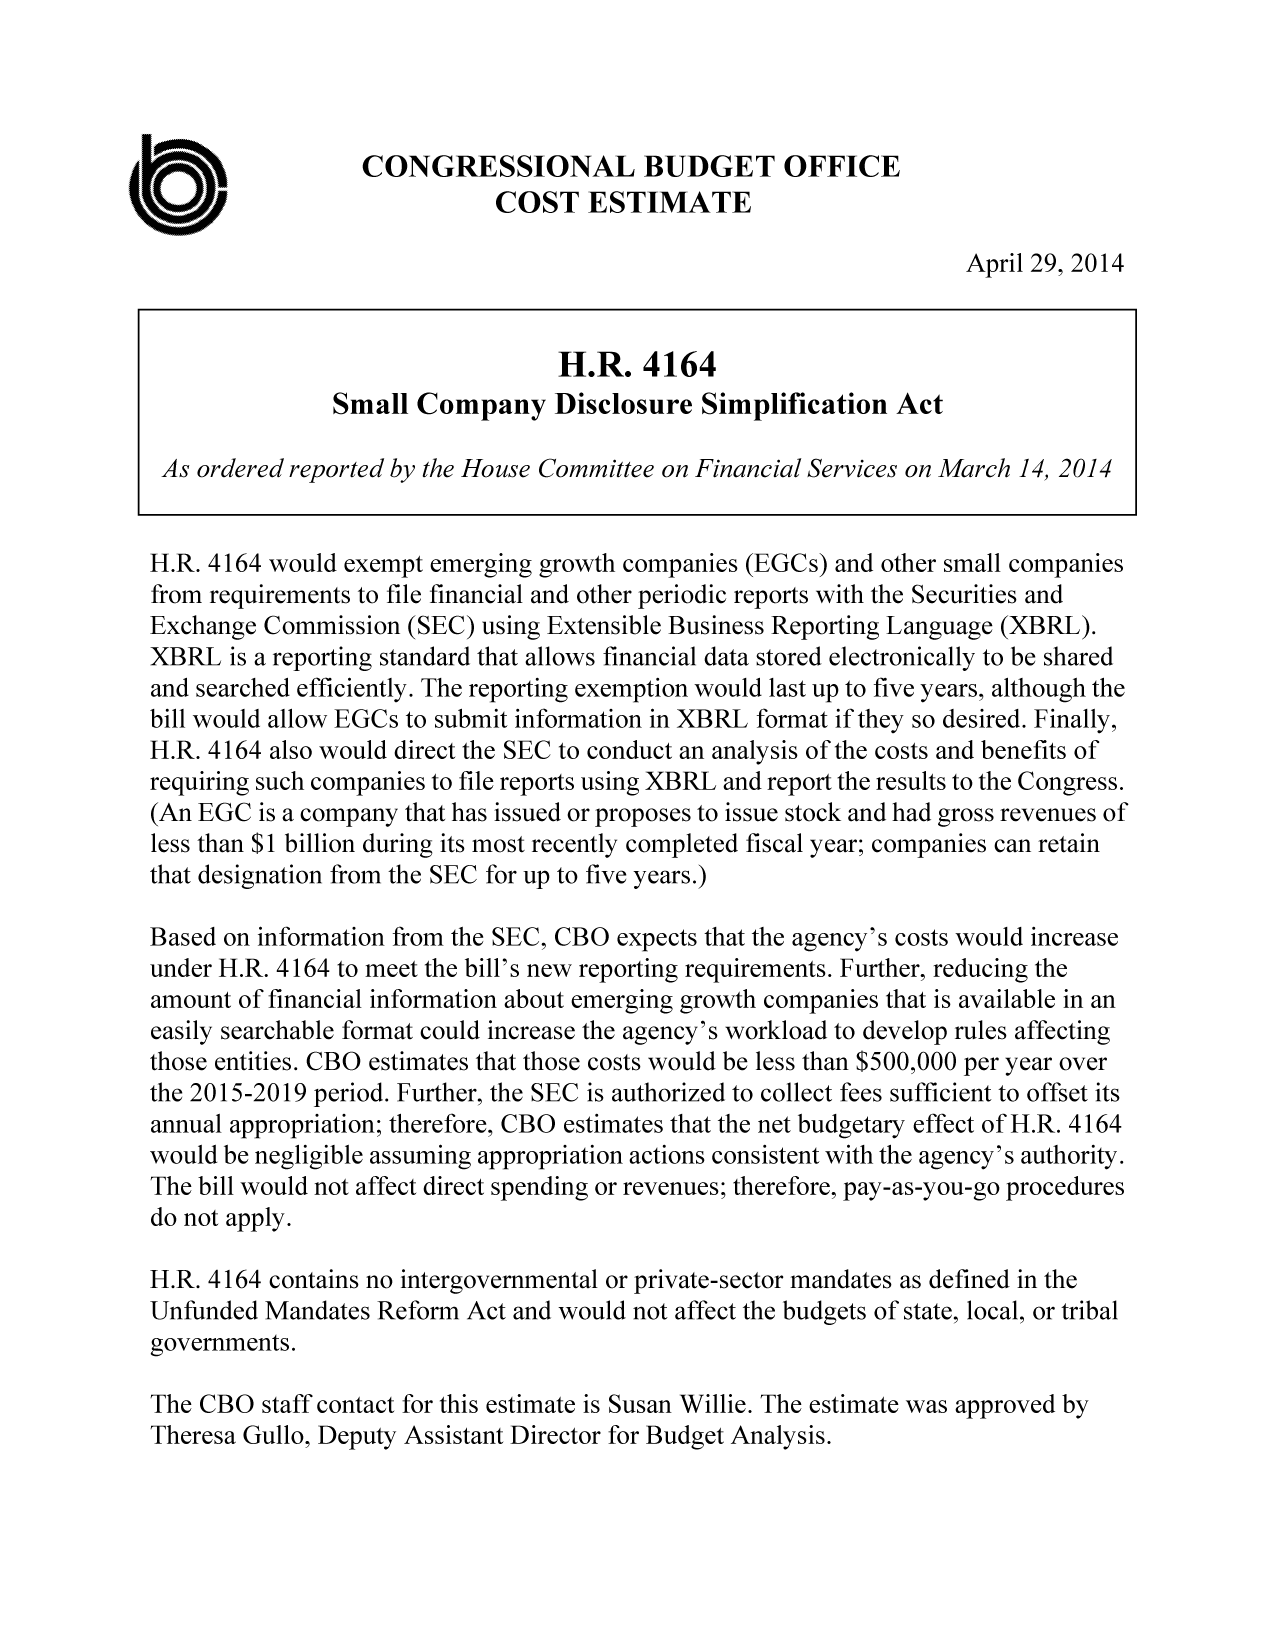 handle is hein.congrec/cbo1602 and id is 1 raw text is: CONGRESSIONAL BUDGET OFFICE
COST ESTIMATE
April 29, 2014
H.R. 4164
Small Company Disclosure Simplification Act
As ordered reported by the House Committee on Financial Services on March 14, 2014
H.R. 4164 would exempt emerging growth companies (EGCs) and other small companies
from requirements to file financial and other periodic reports with the Securities and
Exchange Commission (SEC) using Extensible Business Reporting Language (XBRL).
XBRL is a reporting standard that allows financial data stored electronically to be shared
and searched efficiently. The reporting exemption would last up to five years, although the
bill would allow EGCs to submit information in XBRL format if they so desired. Finally,
H.R. 4164 also would direct the SEC to conduct an analysis of the costs and benefits of
requiring such companies to file reports using XBRL and report the results to the Congress.
(An EGC is a company that has issued or proposes to issue stock and had gross revenues of
less than $1 billion during its most recently completed fiscal year; companies can retain
that designation from the SEC for up to five years.)
Based on information from the SEC, CBO expects that the agency's costs would increase
under H.R. 4164 to meet the bill's new reporting requirements. Further, reducing the
amount of financial information about emerging growth companies that is available in an
easily searchable format could increase the agency's workload to develop rules affecting
those entities. CBO estimates that those costs would be less than $500,000 per year over
the 2015-2019 period. Further, the SEC is authorized to collect fees sufficient to offset its
annual appropriation; therefore, CBO estimates that the net budgetary effect of H.R. 4164
would be negligible assuming appropriation actions consistent with the agency's authority.
The bill would not affect direct spending or revenues; therefore, pay-as-you-go procedures
do not apply.
H.R. 4164 contains no intergovernmental or private-sector mandates as defined in the
Unfunded Mandates Reform Act and would not affect the budgets of state, local, or tribal
governments.
The CBO staff contact for this estimate is Susan Willie. The estimate was approved by
Theresa Gullo, Deputy Assistant Director for Budget Analysis.


